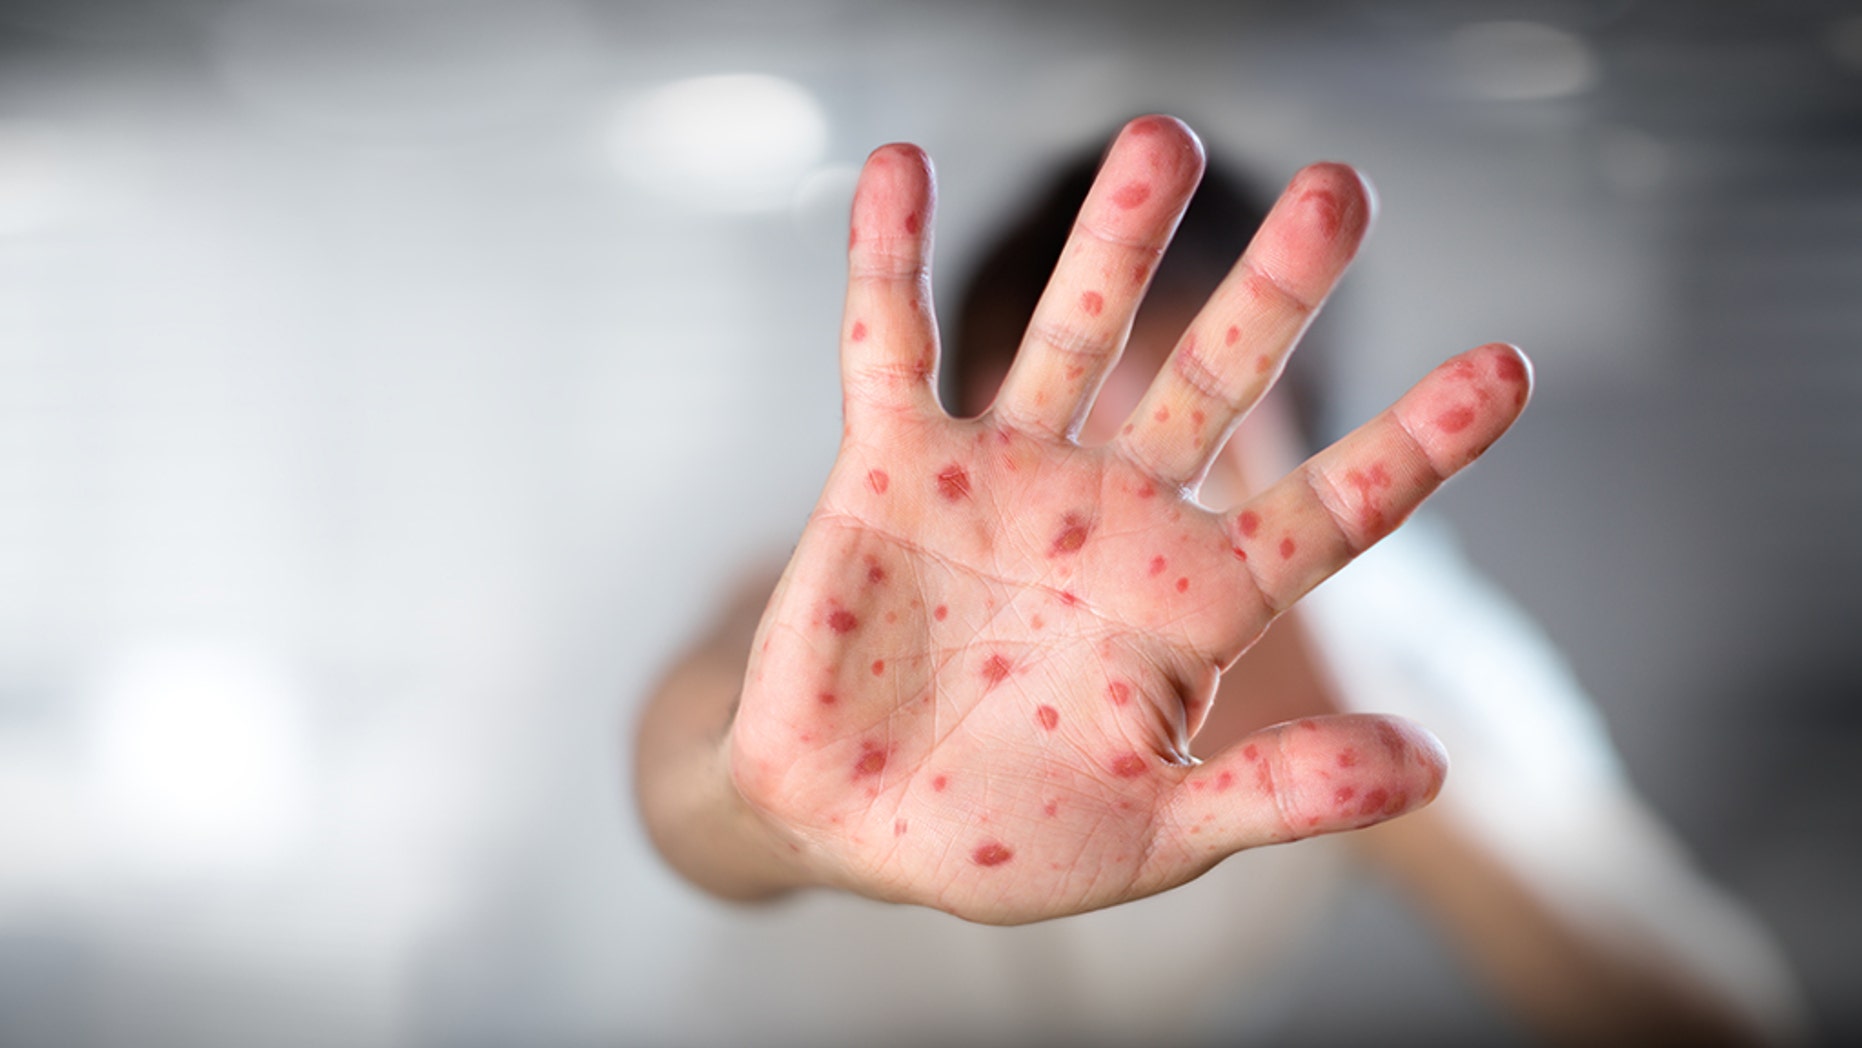 International traveler with measles arrived at New Jersey airport, state health officials say; warn of possible exposure